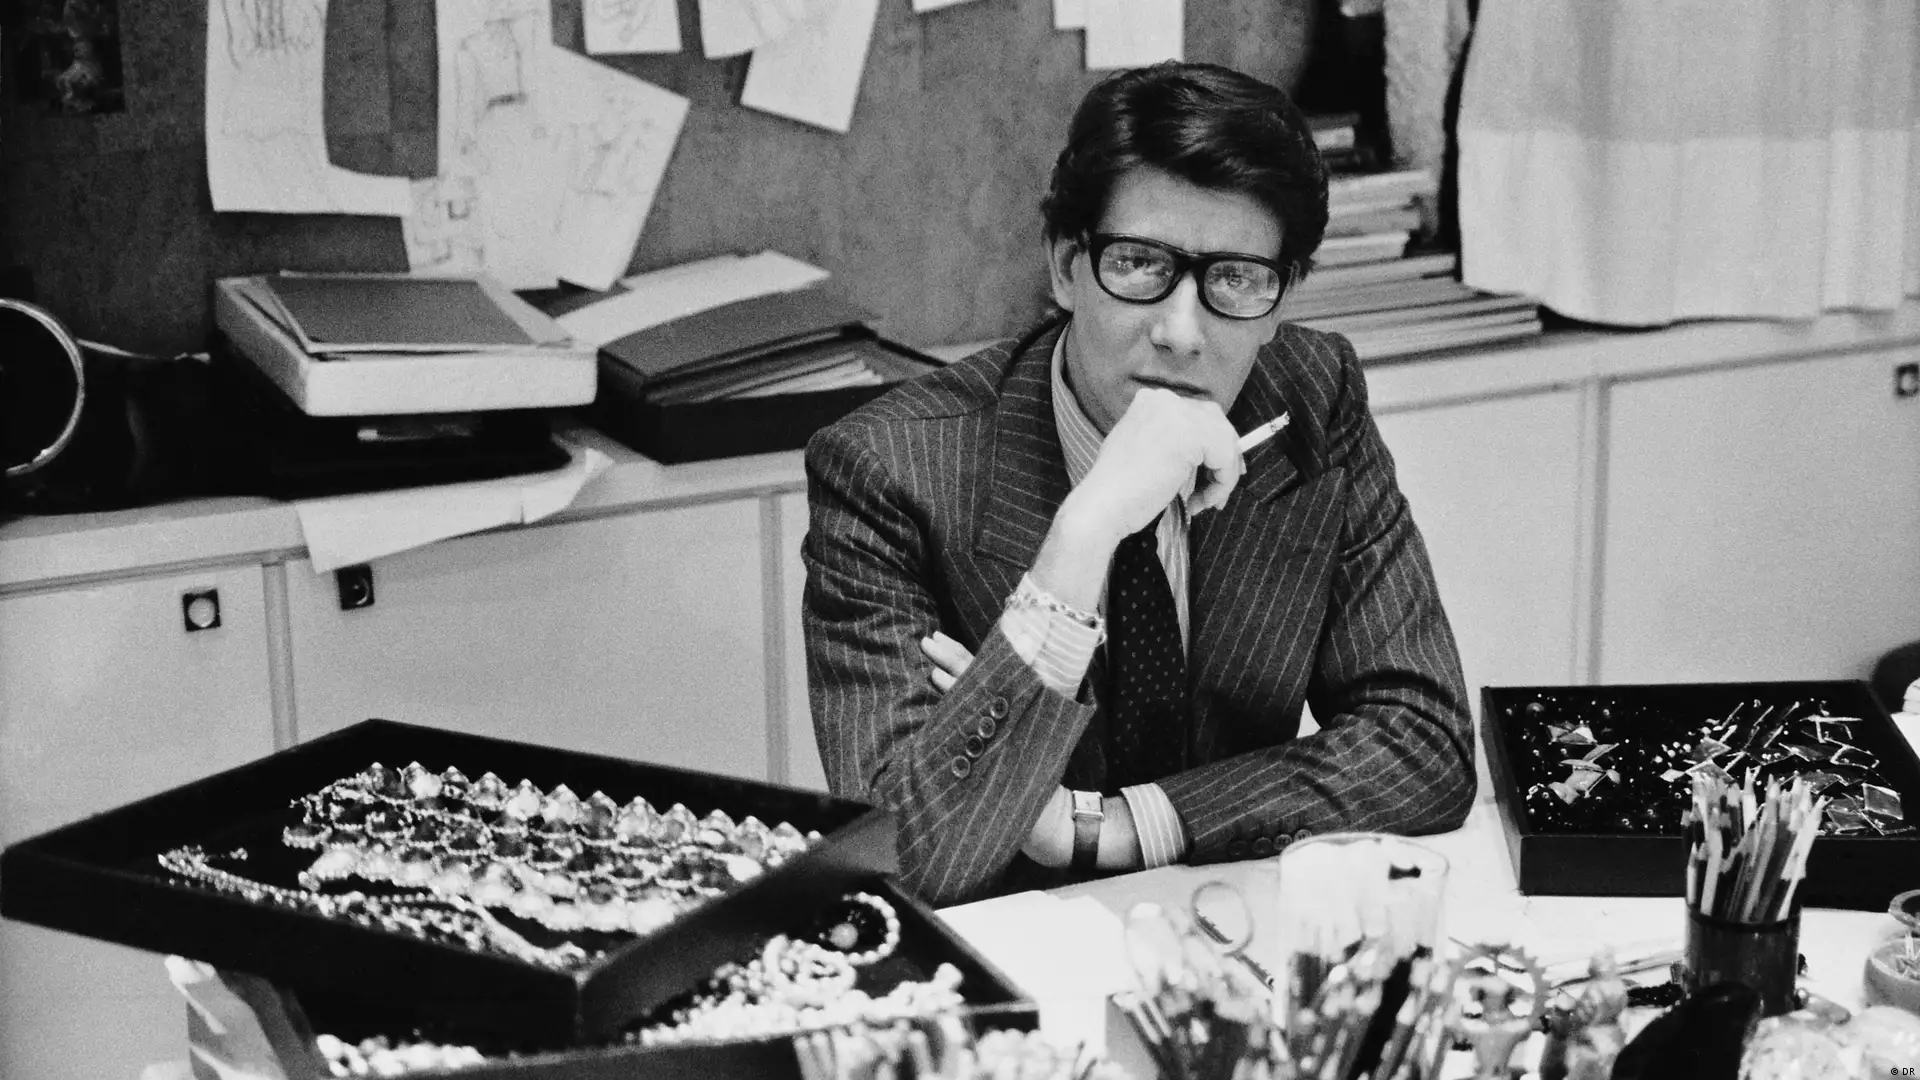 Yves Saint Laurent's haircut was a symbol of French cool